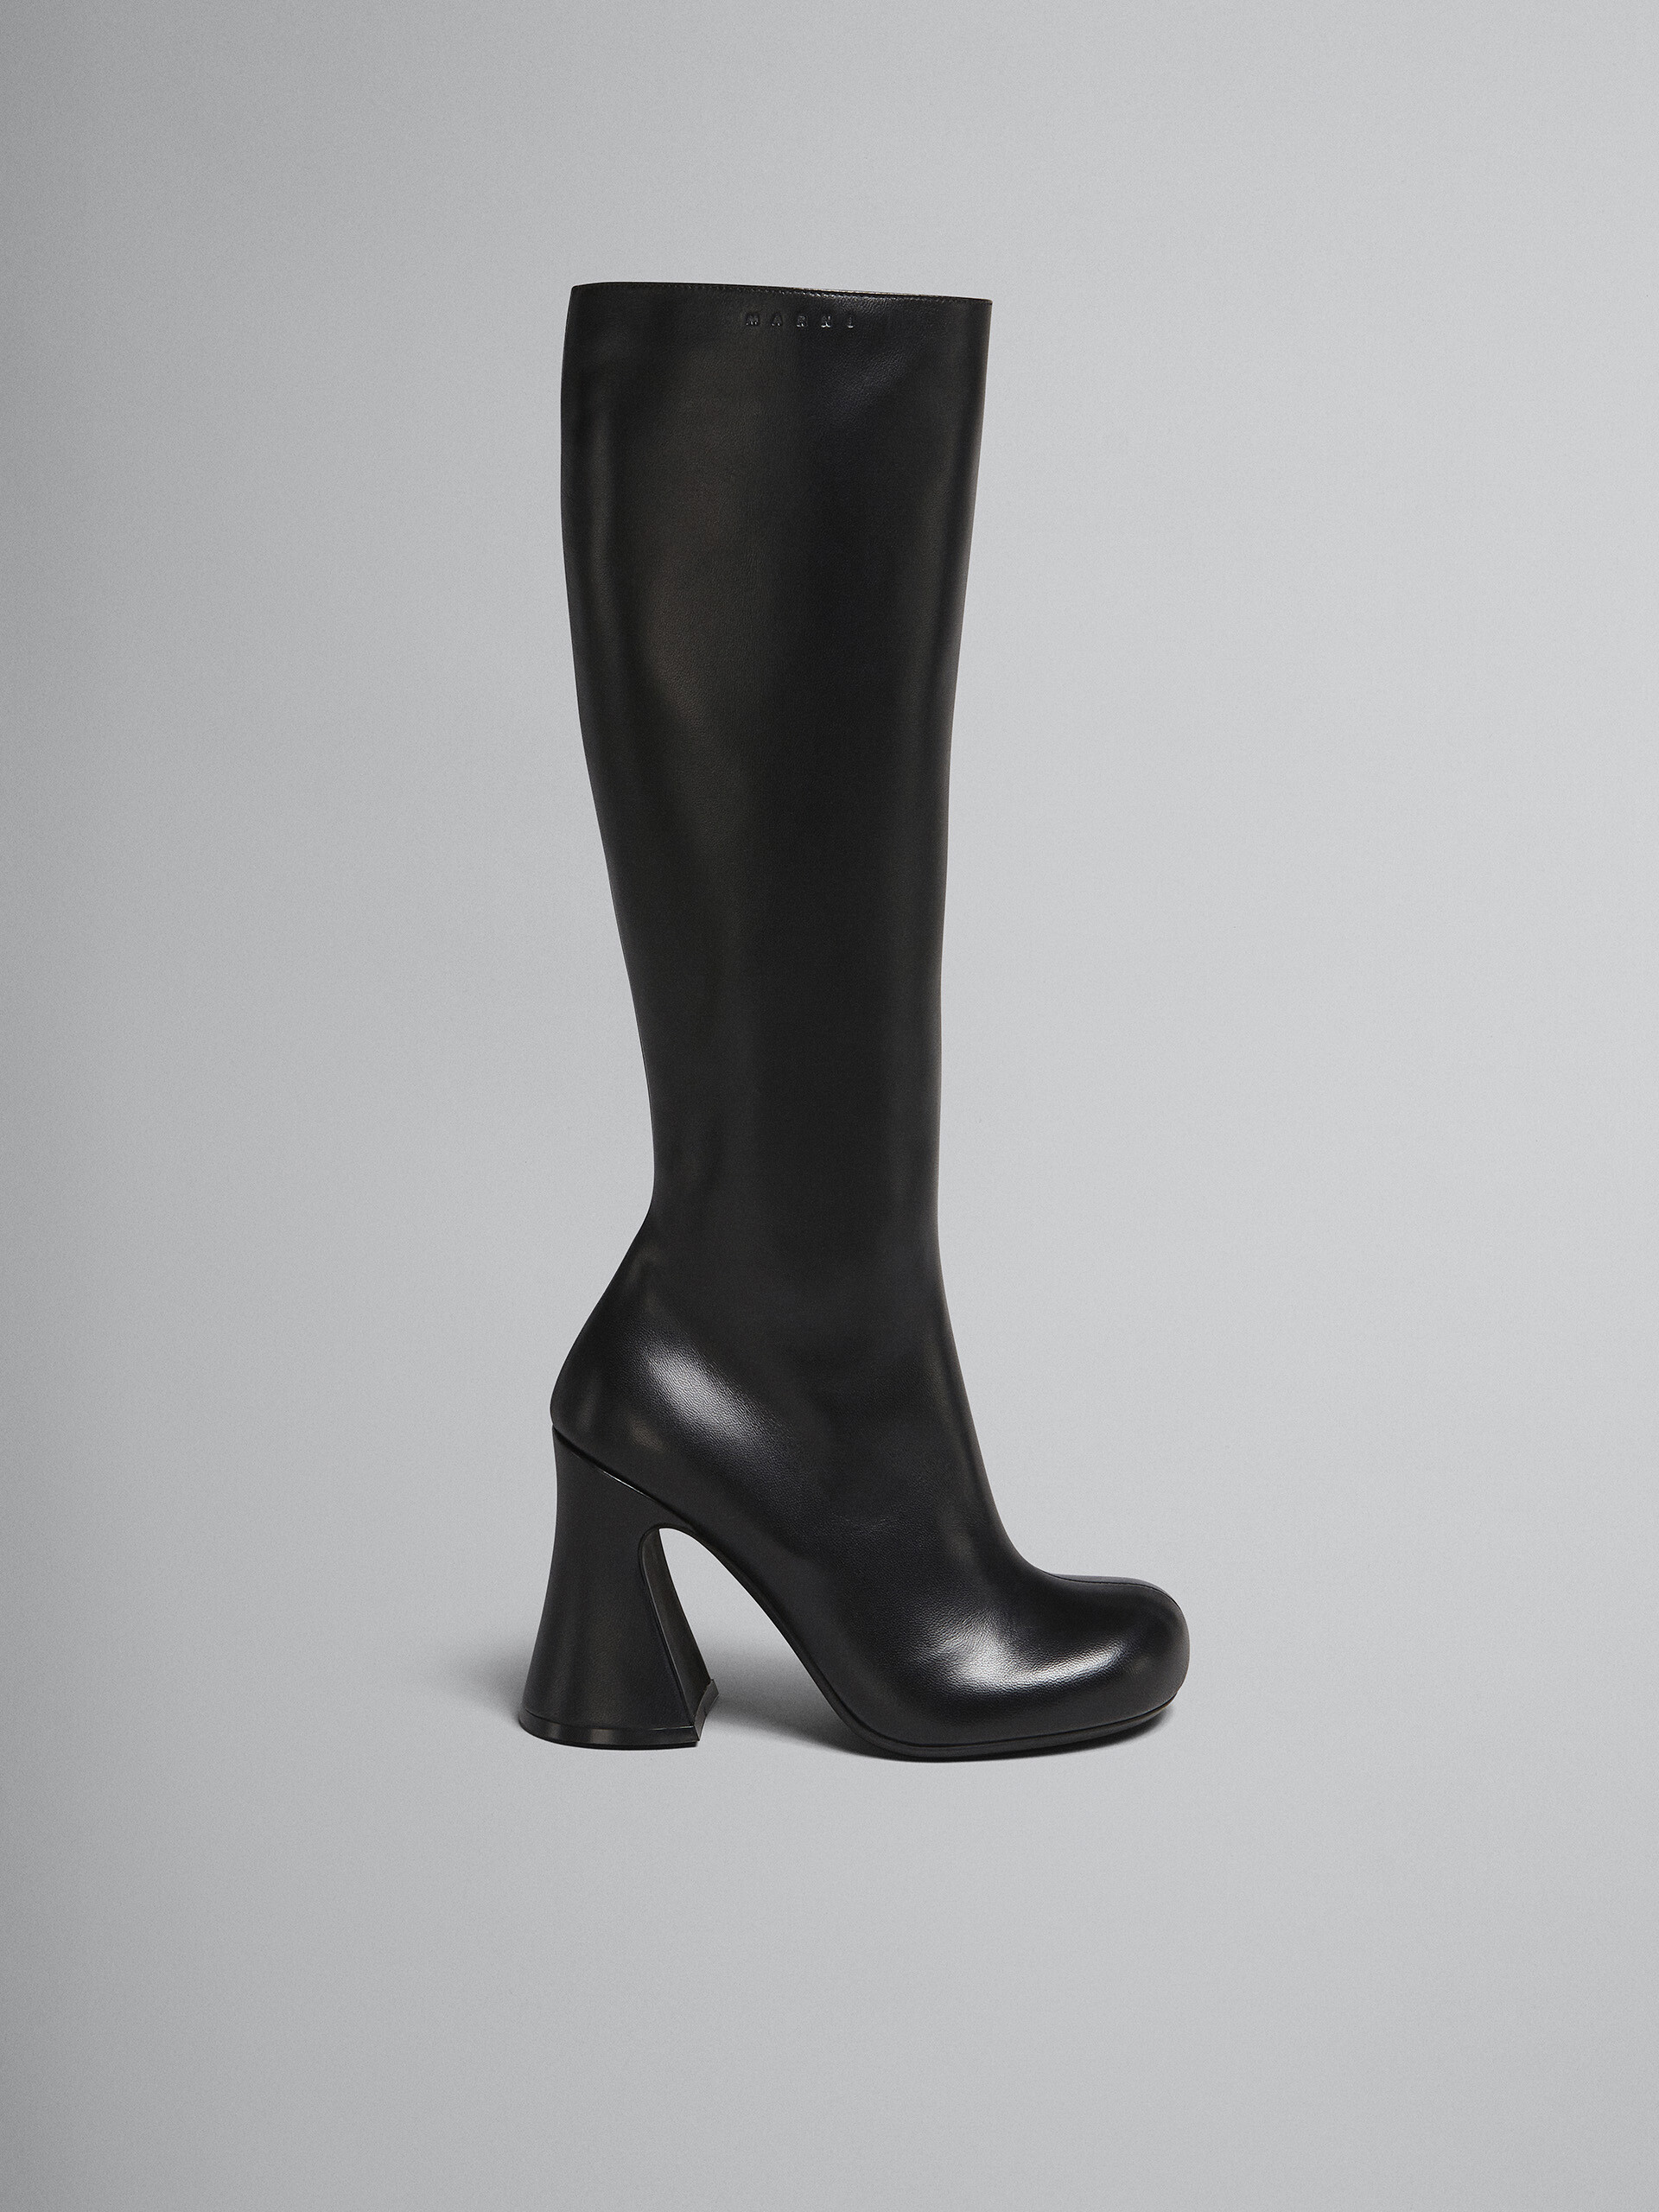 Black leather boot - Boots - Image 1